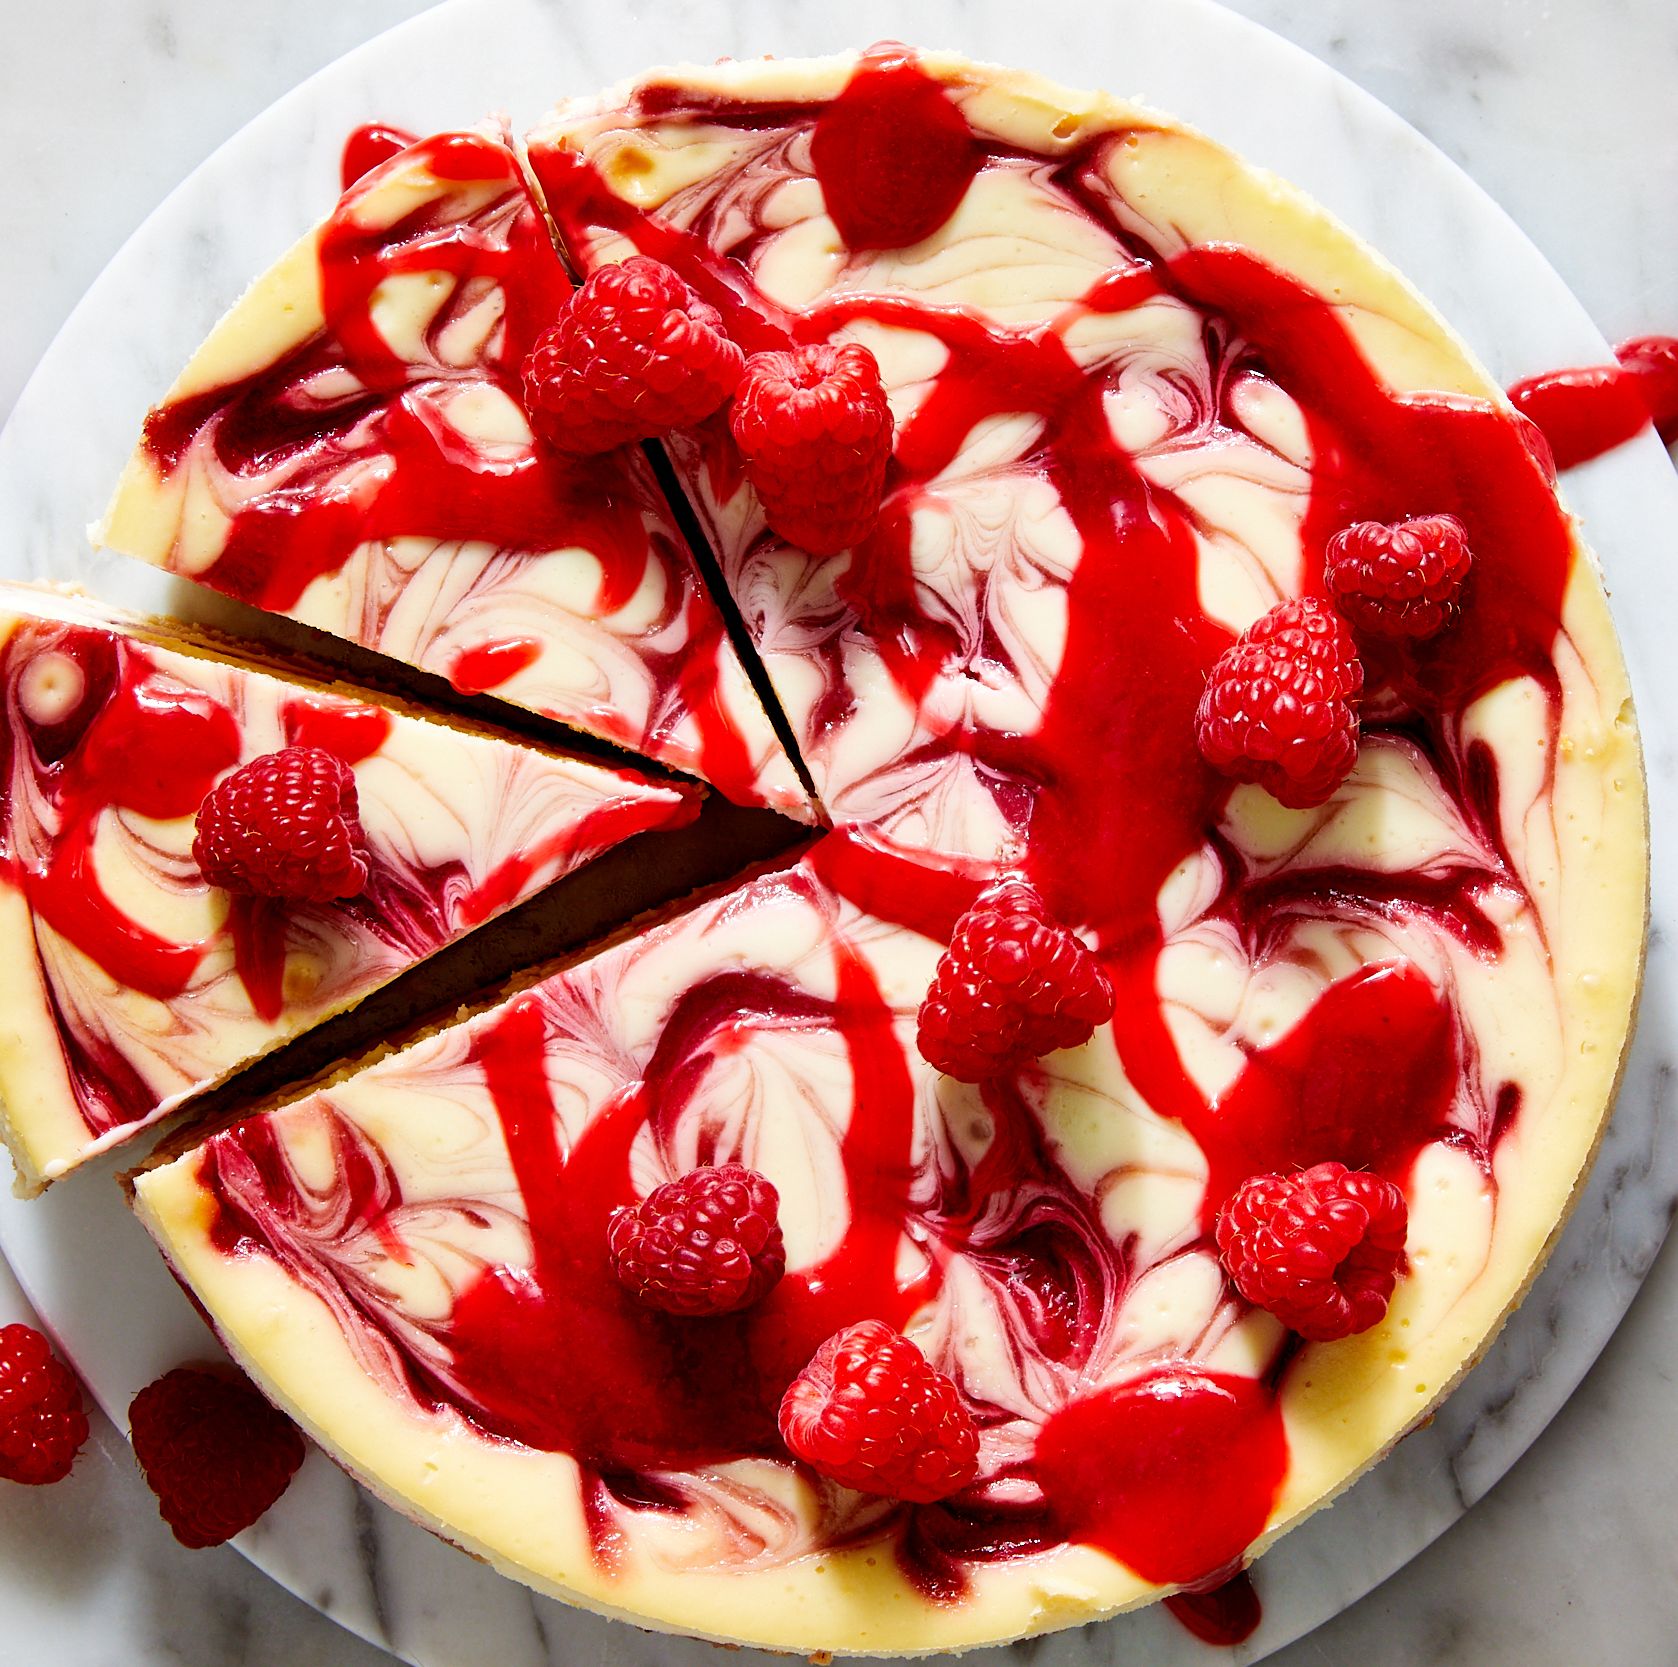 Raspberry Cheesecake Is Better Than A Box Of Chocolates